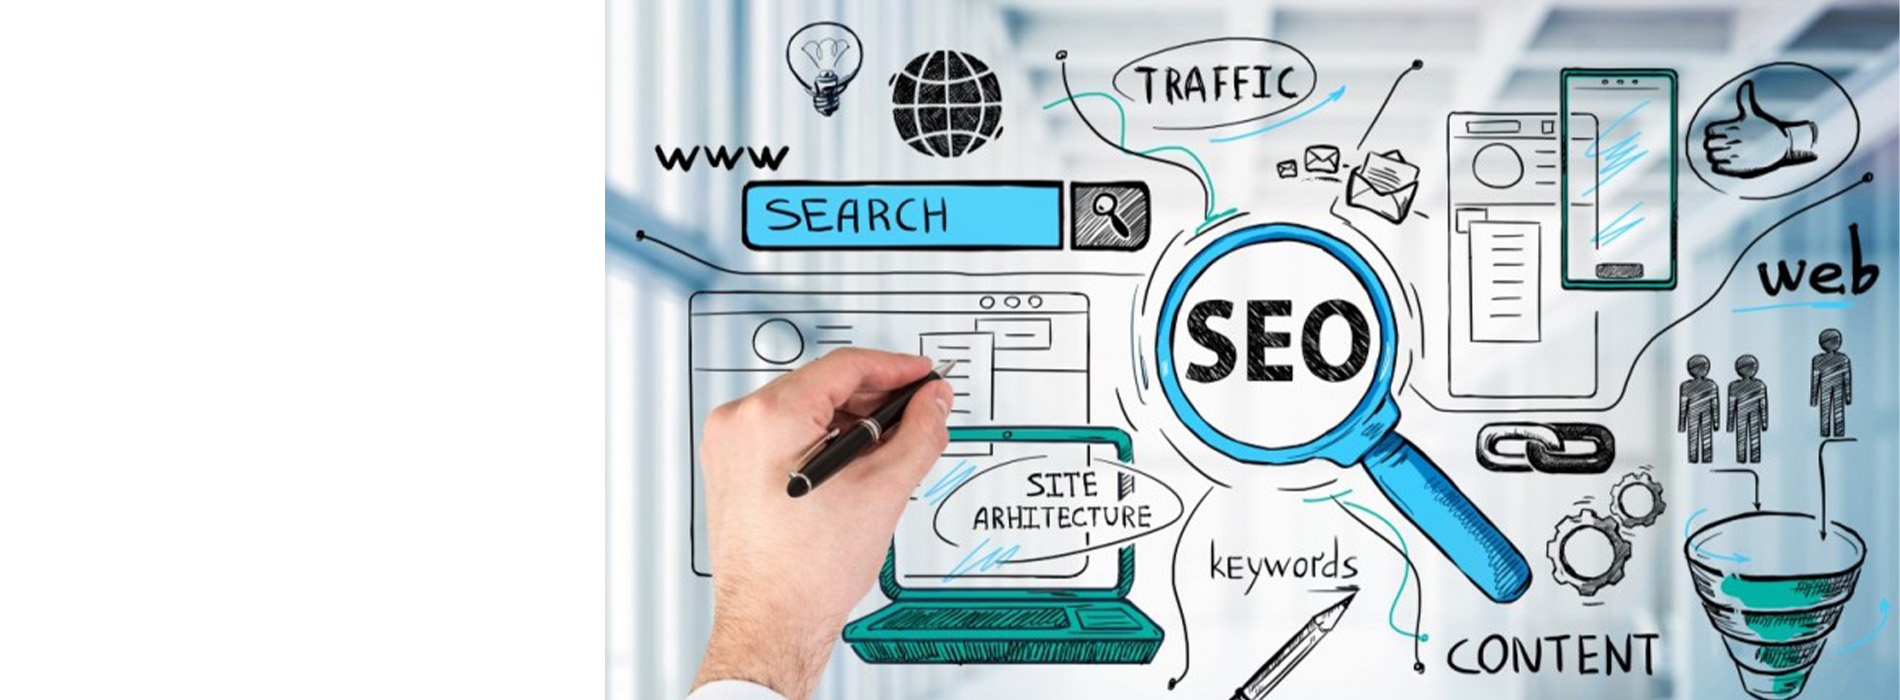 The image depicts a hand drawing a magnifying glass over the word  SEO  on a digital board, which is surrounded by various icons and diagrams related to search engine optimization and online marketing.